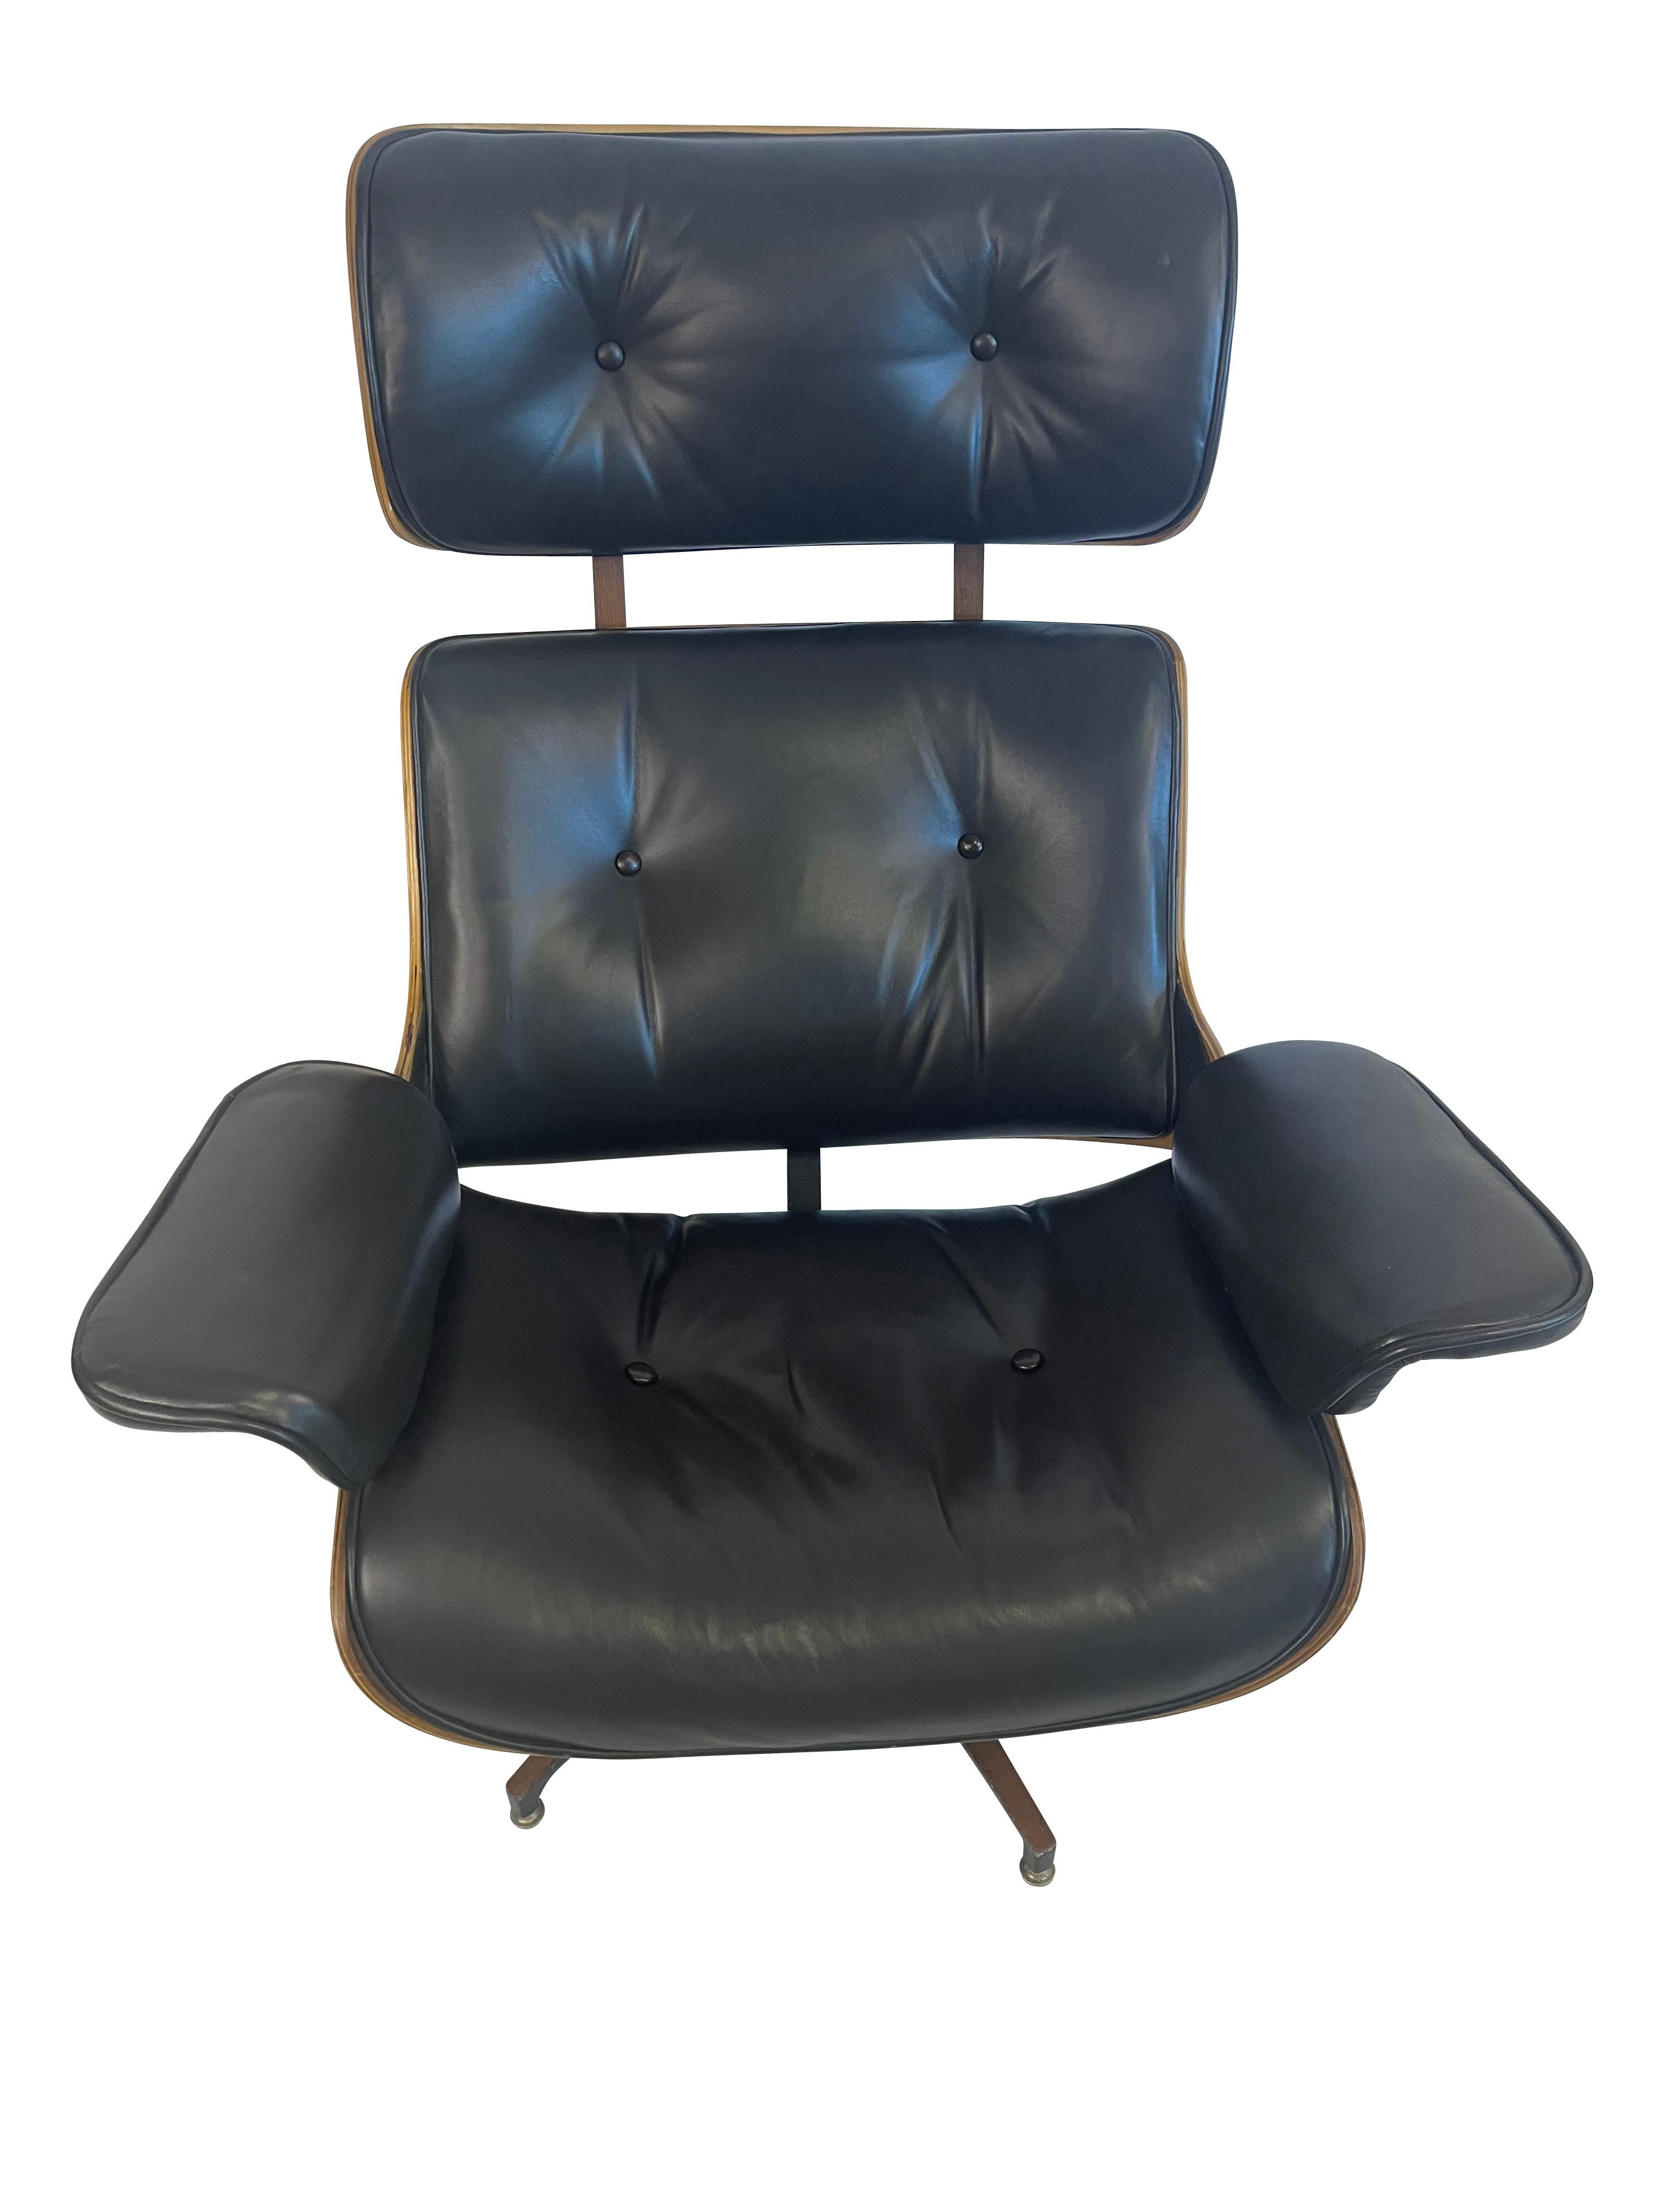 George Mulhauser designed Plycraft walnut and Italian leather lounge chairs and ottomans, bent stacked laminated plywood swivel tilting walnut lounge chairs, and ottomans in the style of Eames. They are in excellent condition and professionally